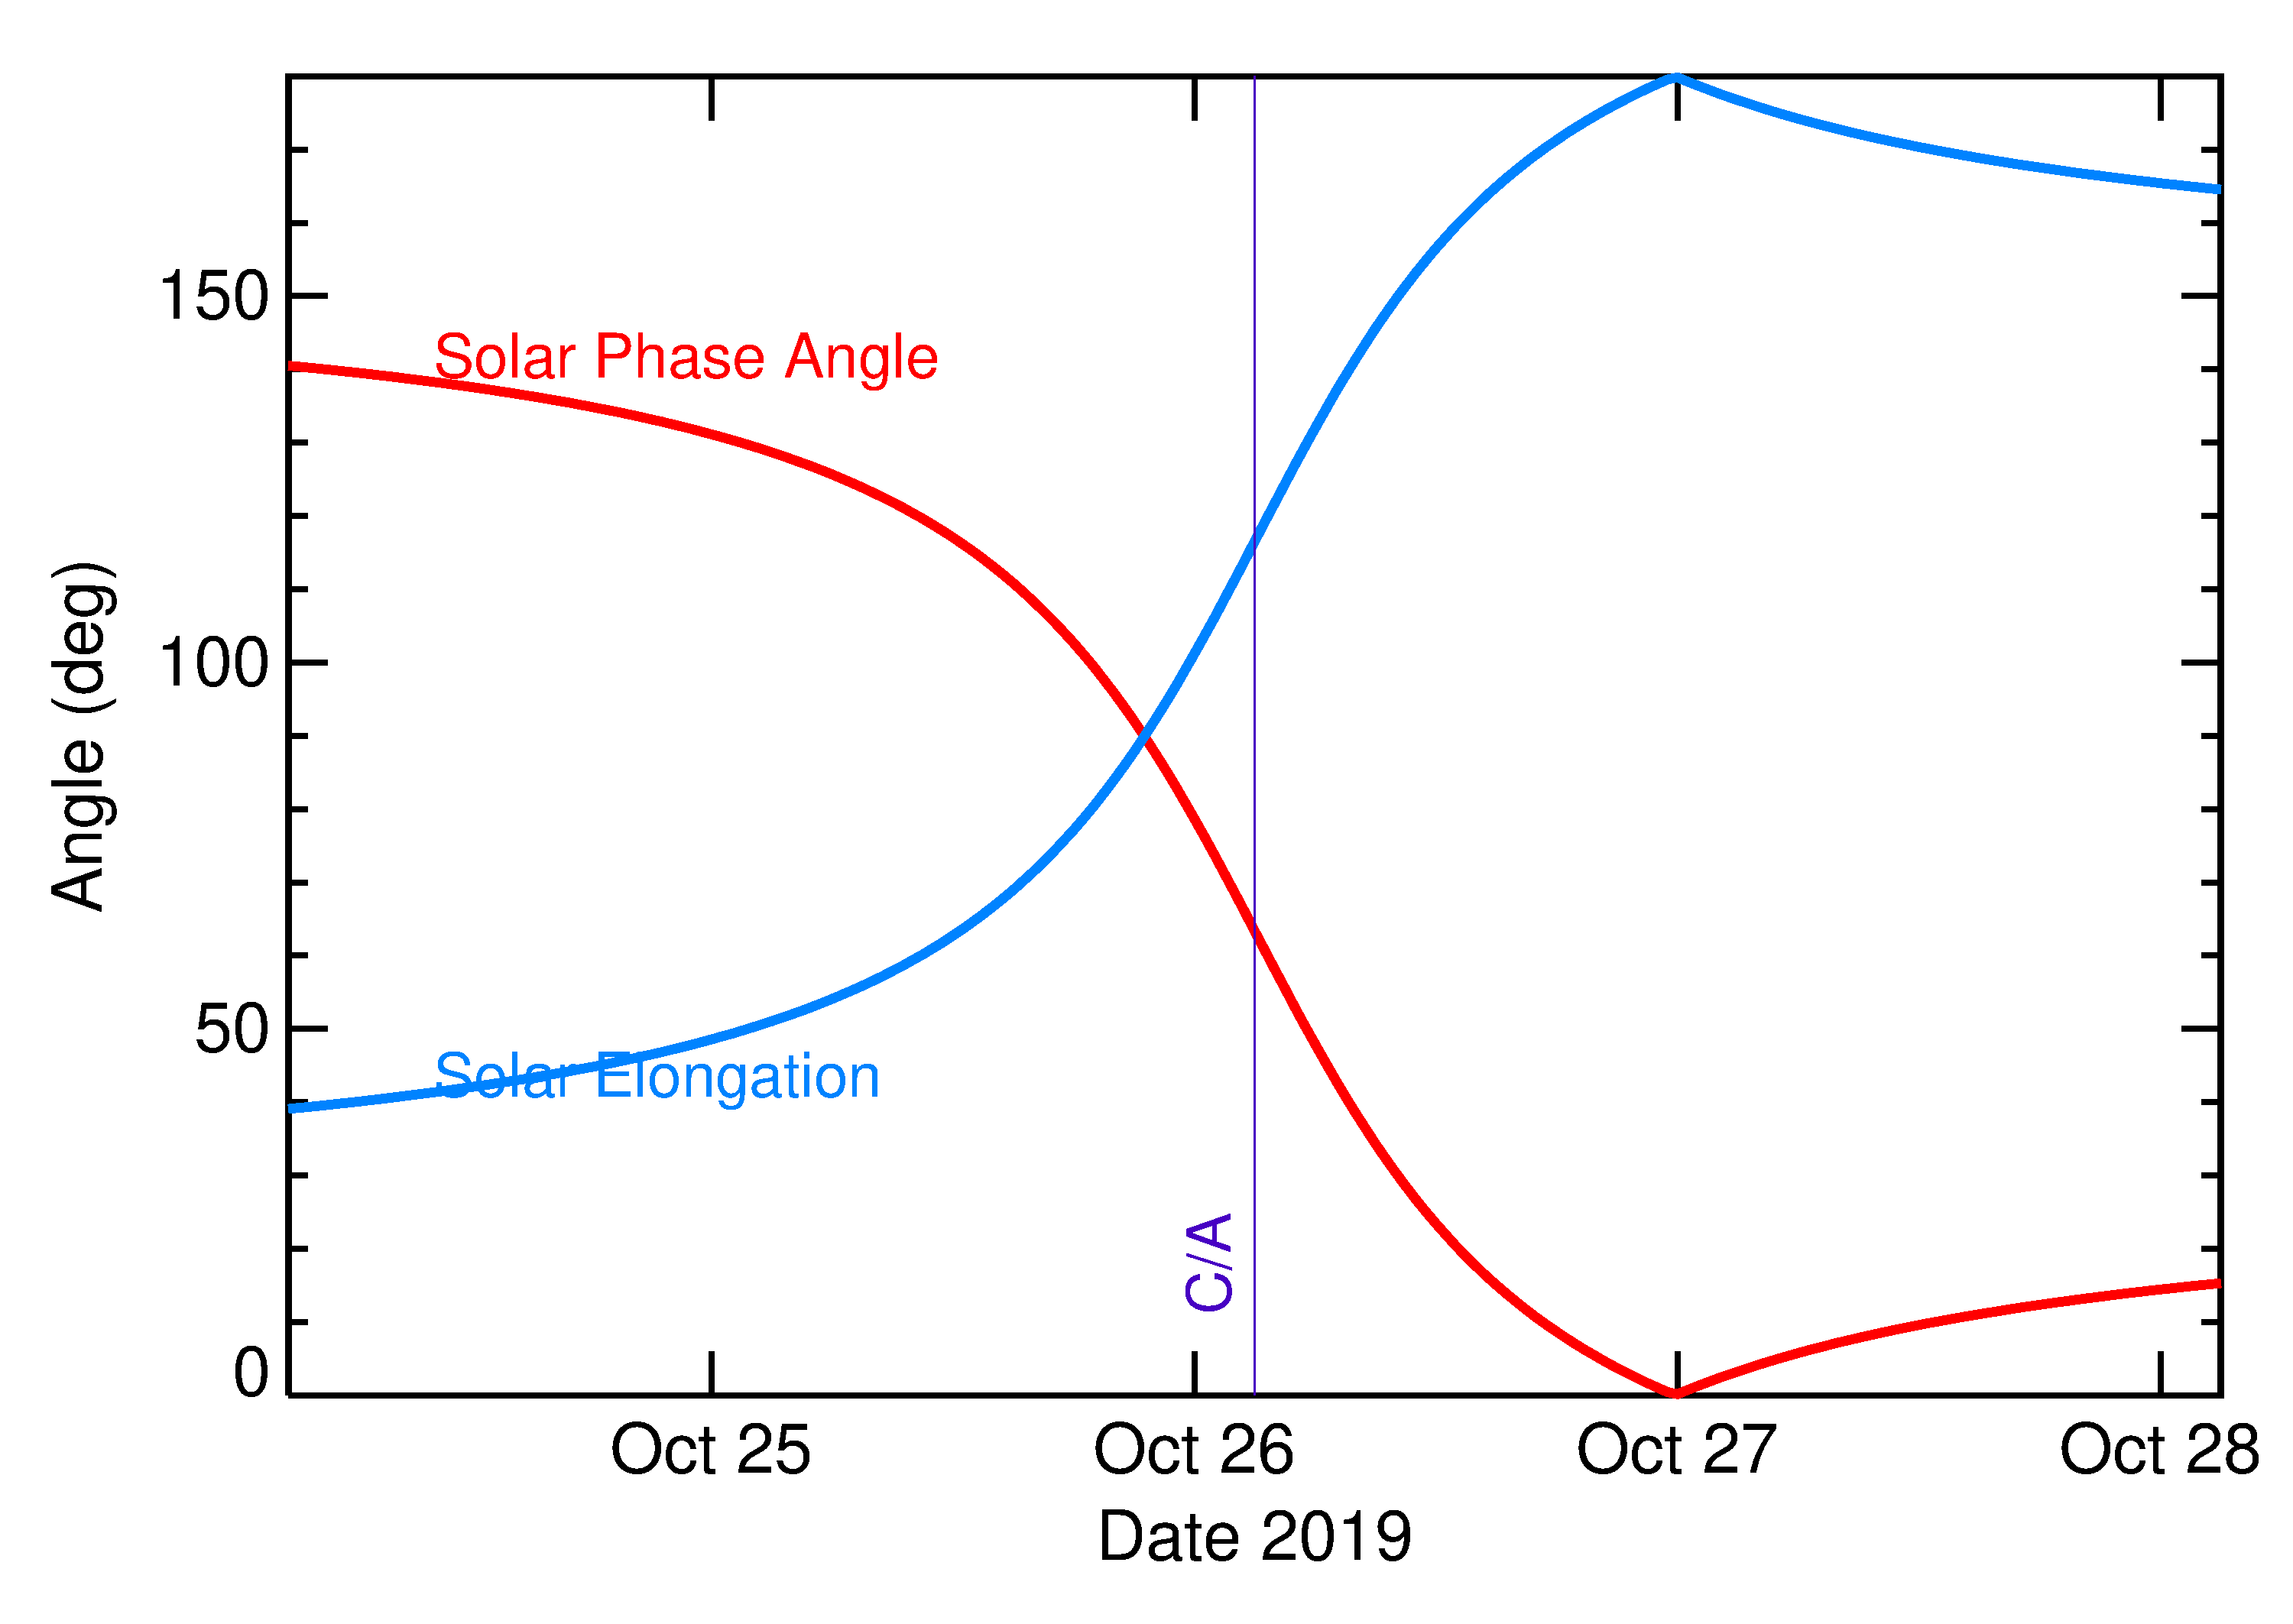 Solar Elongation and Solar Phase Angle of 2019 UX12 in the days around closest approach